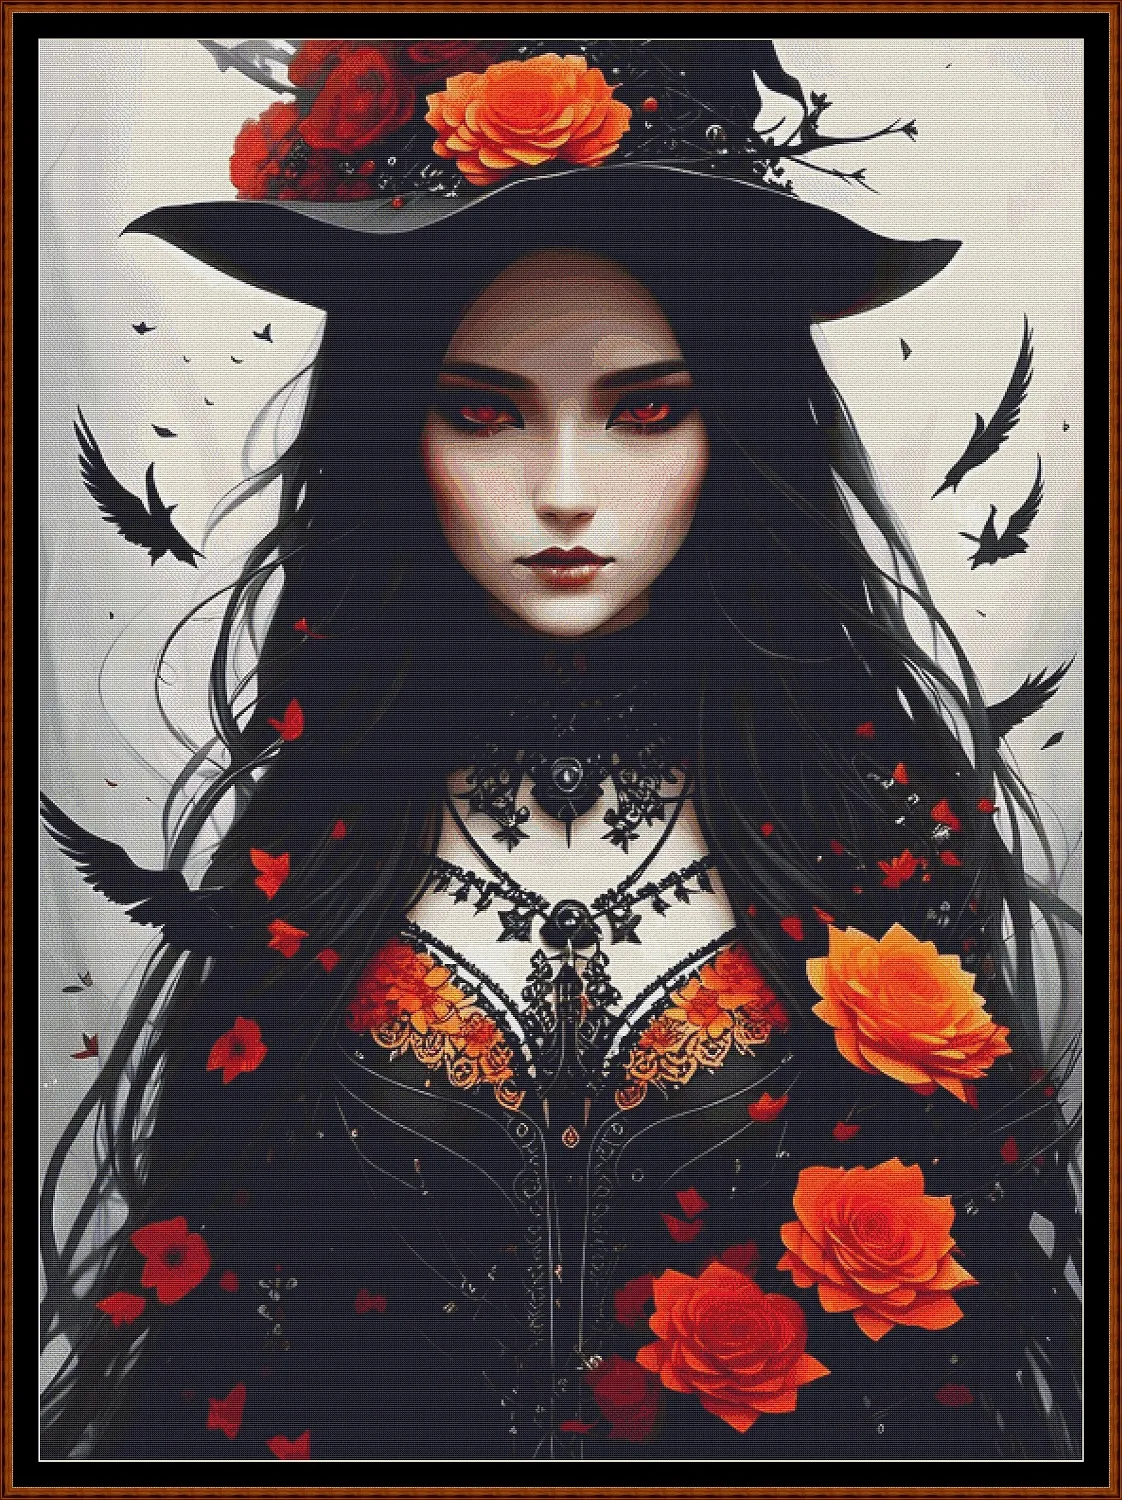 Witch Girl - Soirée  patterns are expertly created from art by Thanh Nguyen under Public Domain CC0 license